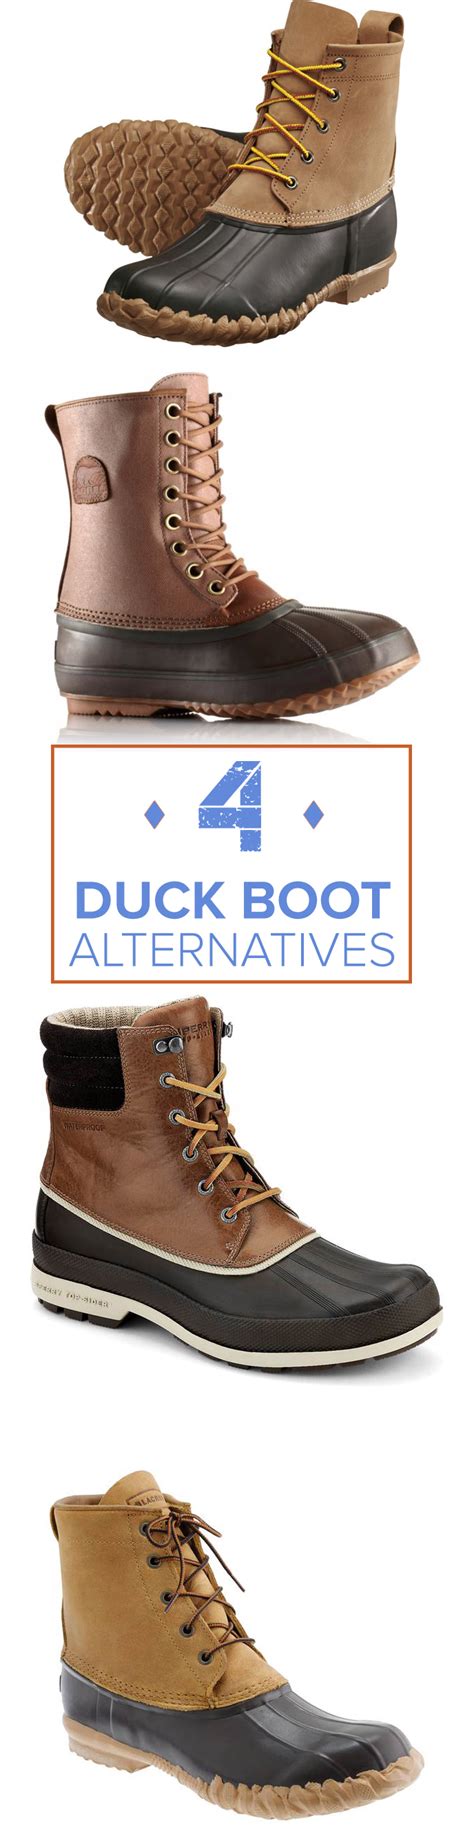 Hunting For L L Bean Duck Boots Try These 4 Cute Alternatives Duck Boots Boots Ll Bean Boots